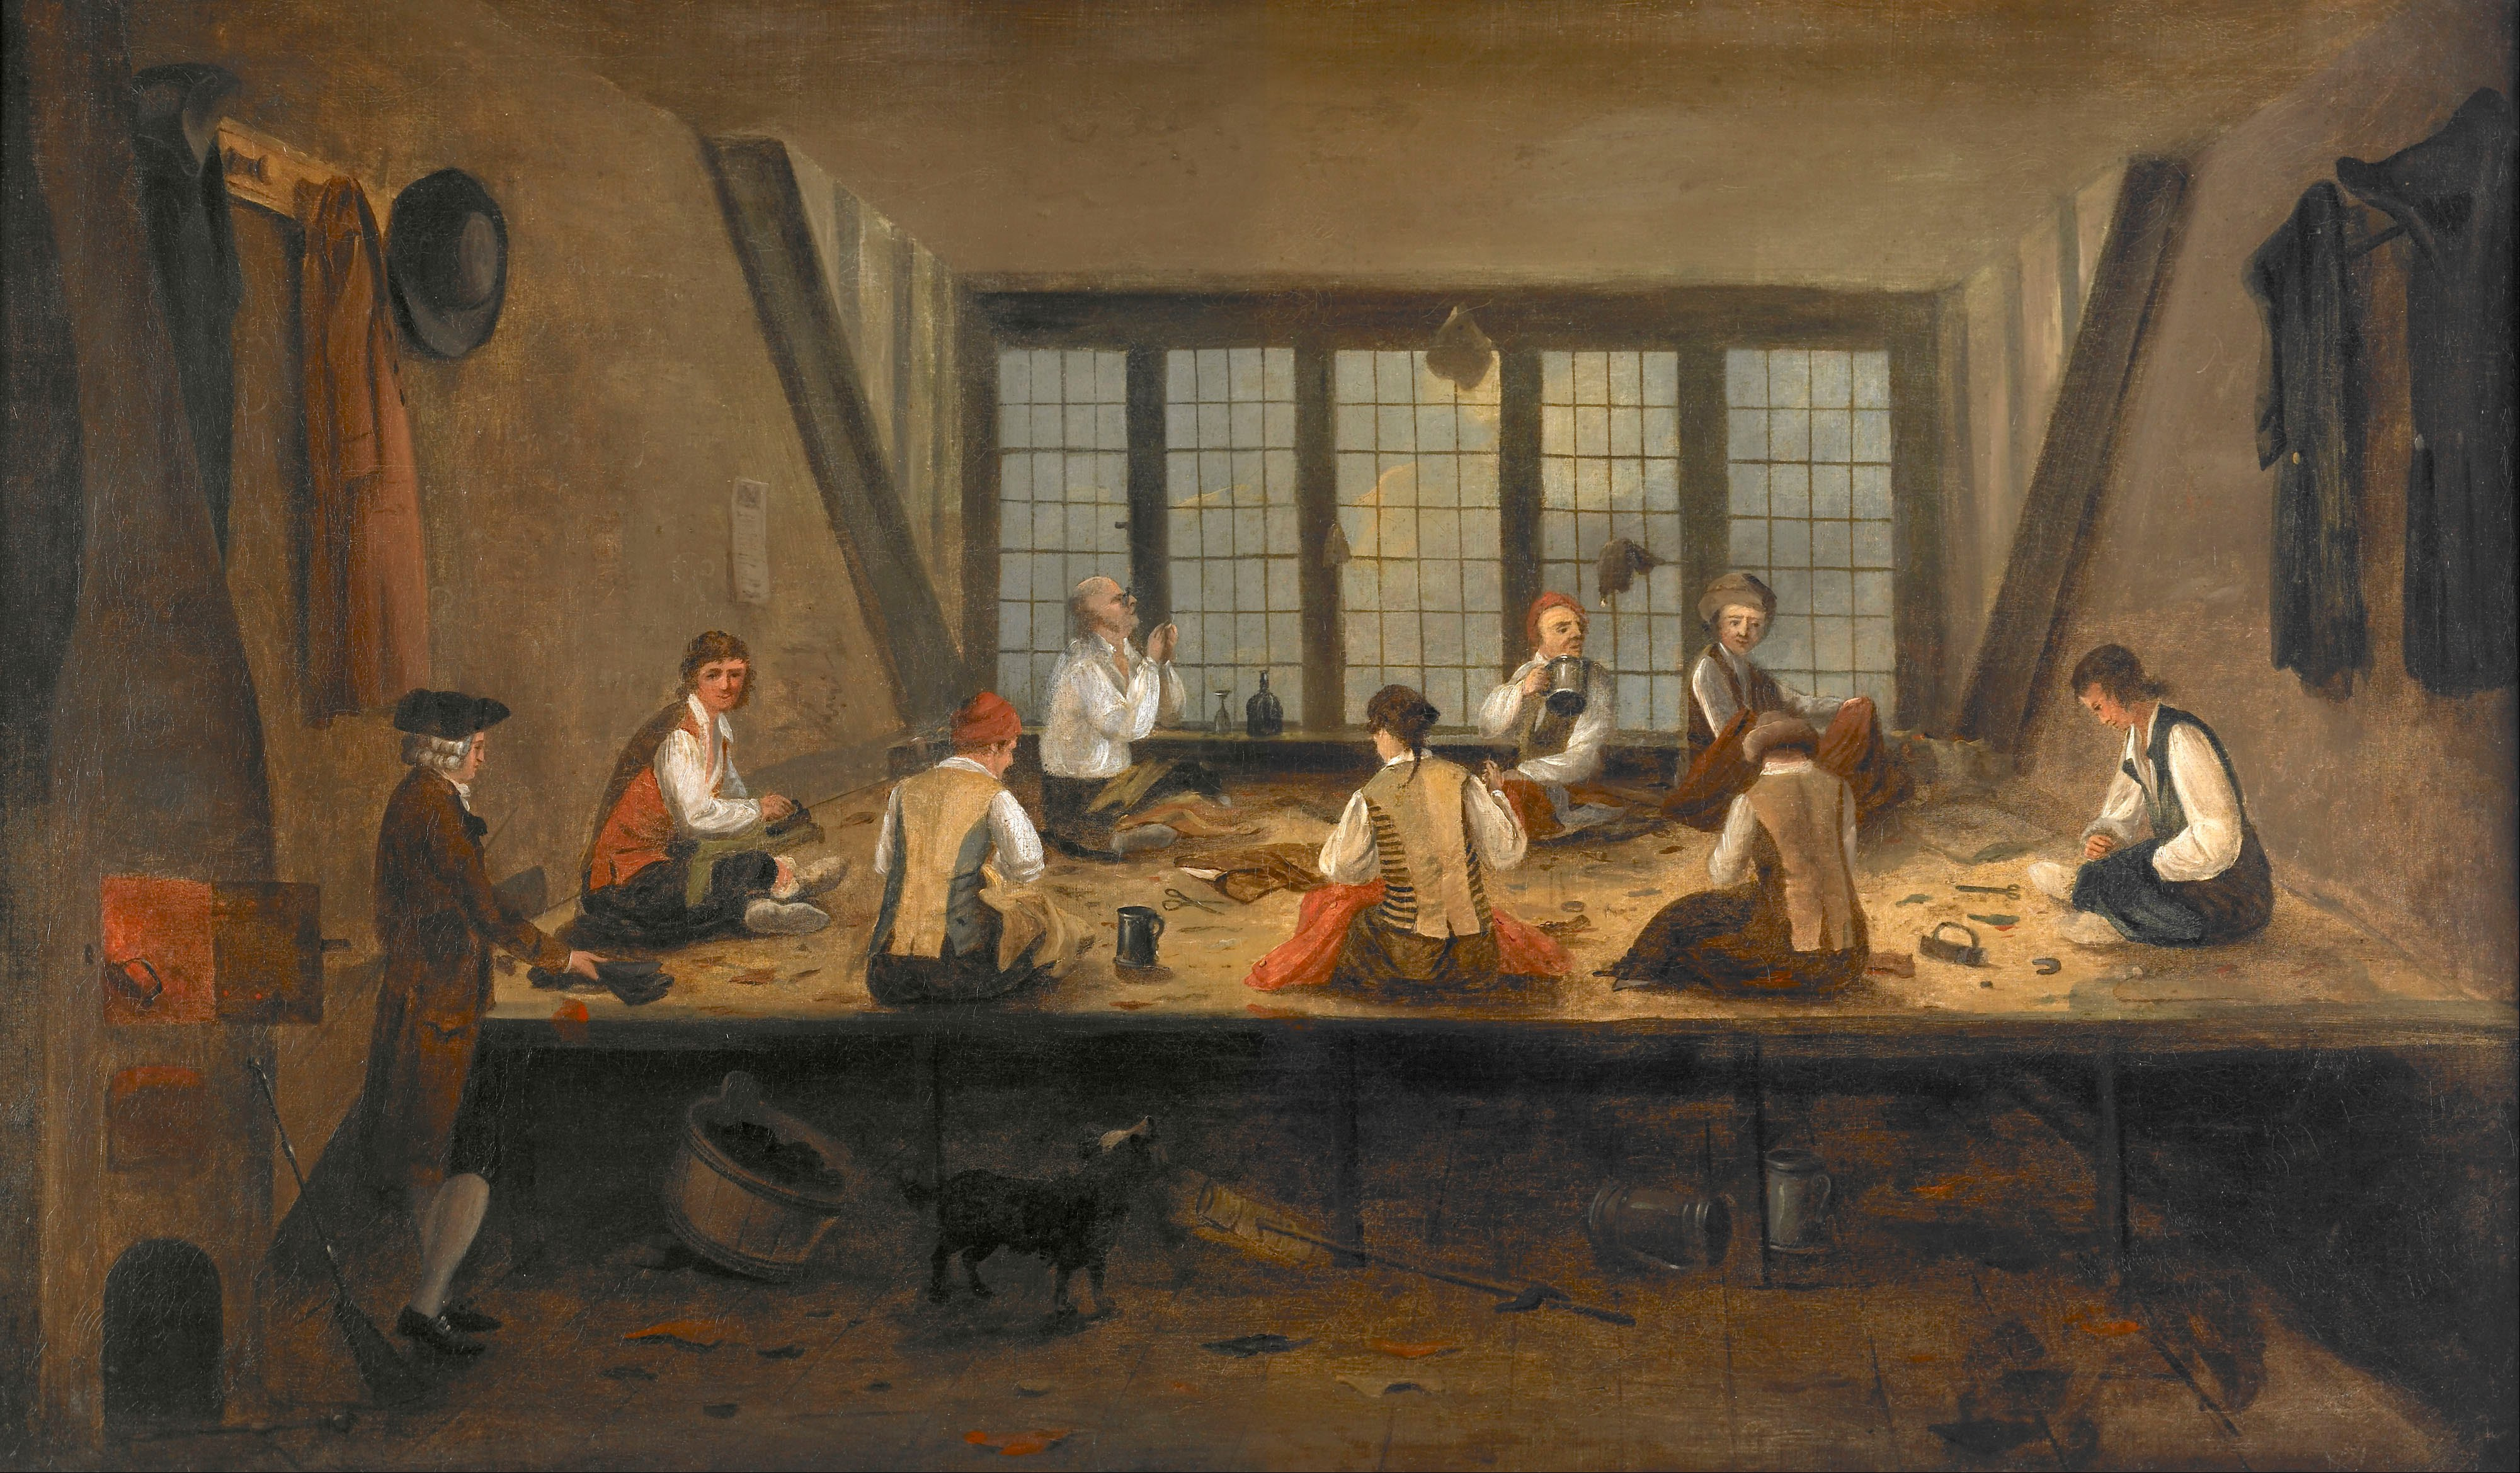 Painting; oil on canvas - Interior of a Tailor's Shop - Google Art Project